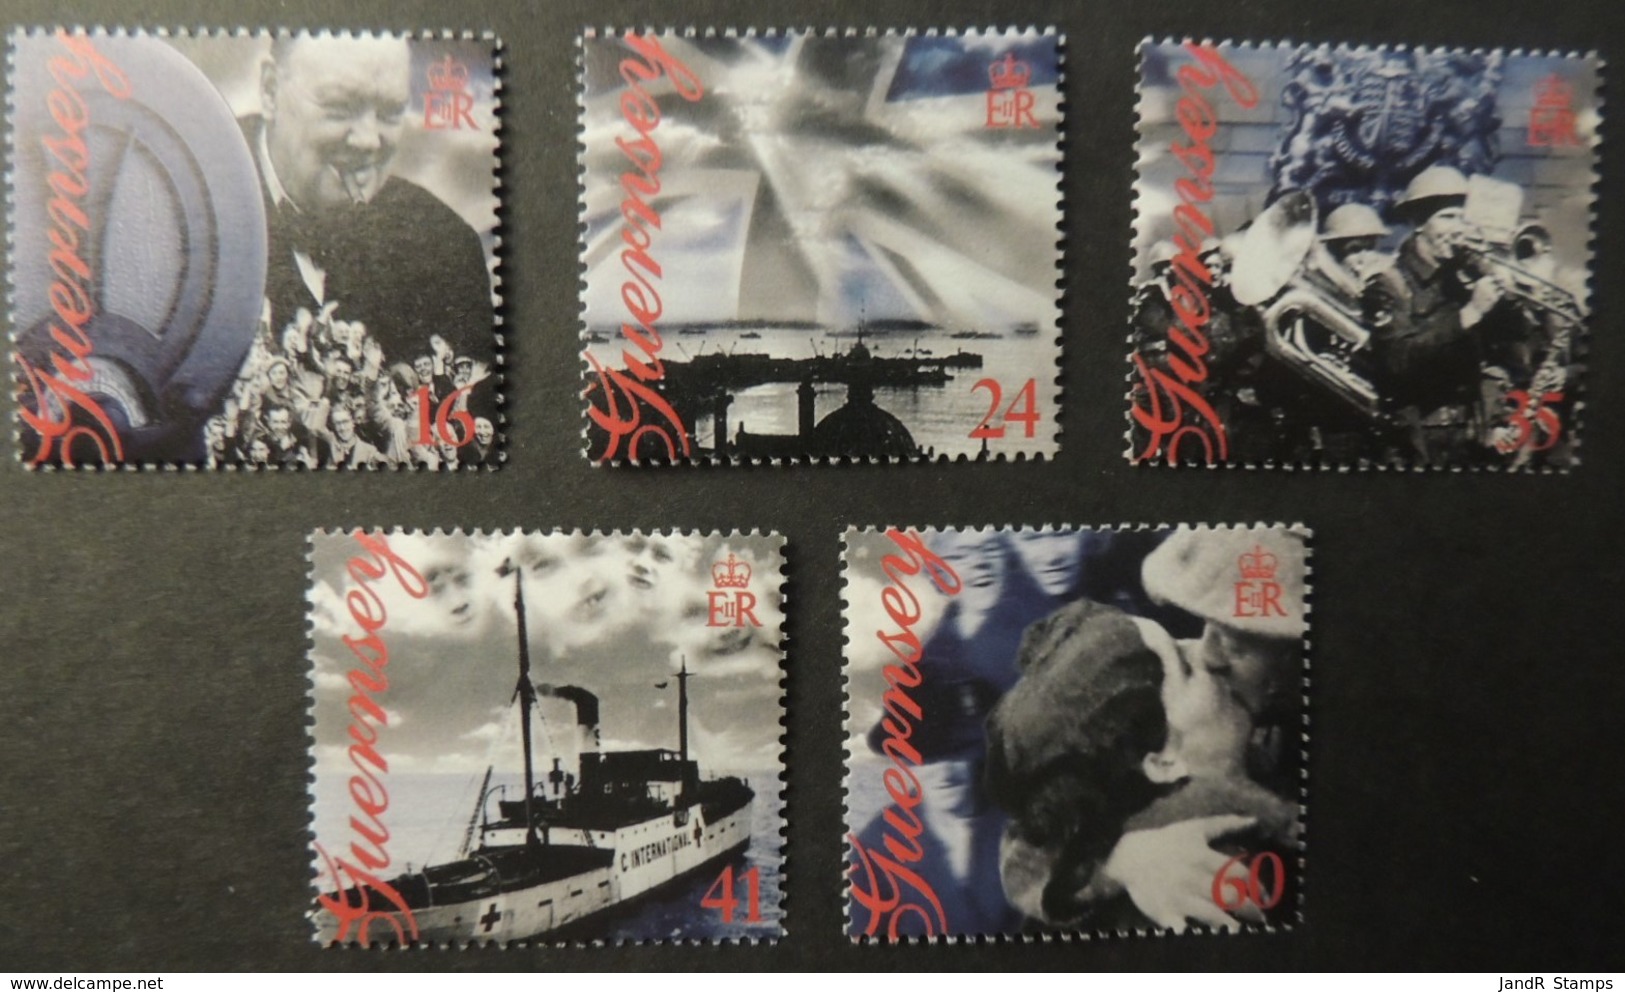 GUERNSEY 1995 50th ANNIVERSARY OF LIBERATION SG672-676 MNH 5 VALUES SHIPS CHURCHILL MUSIC - Guernsey